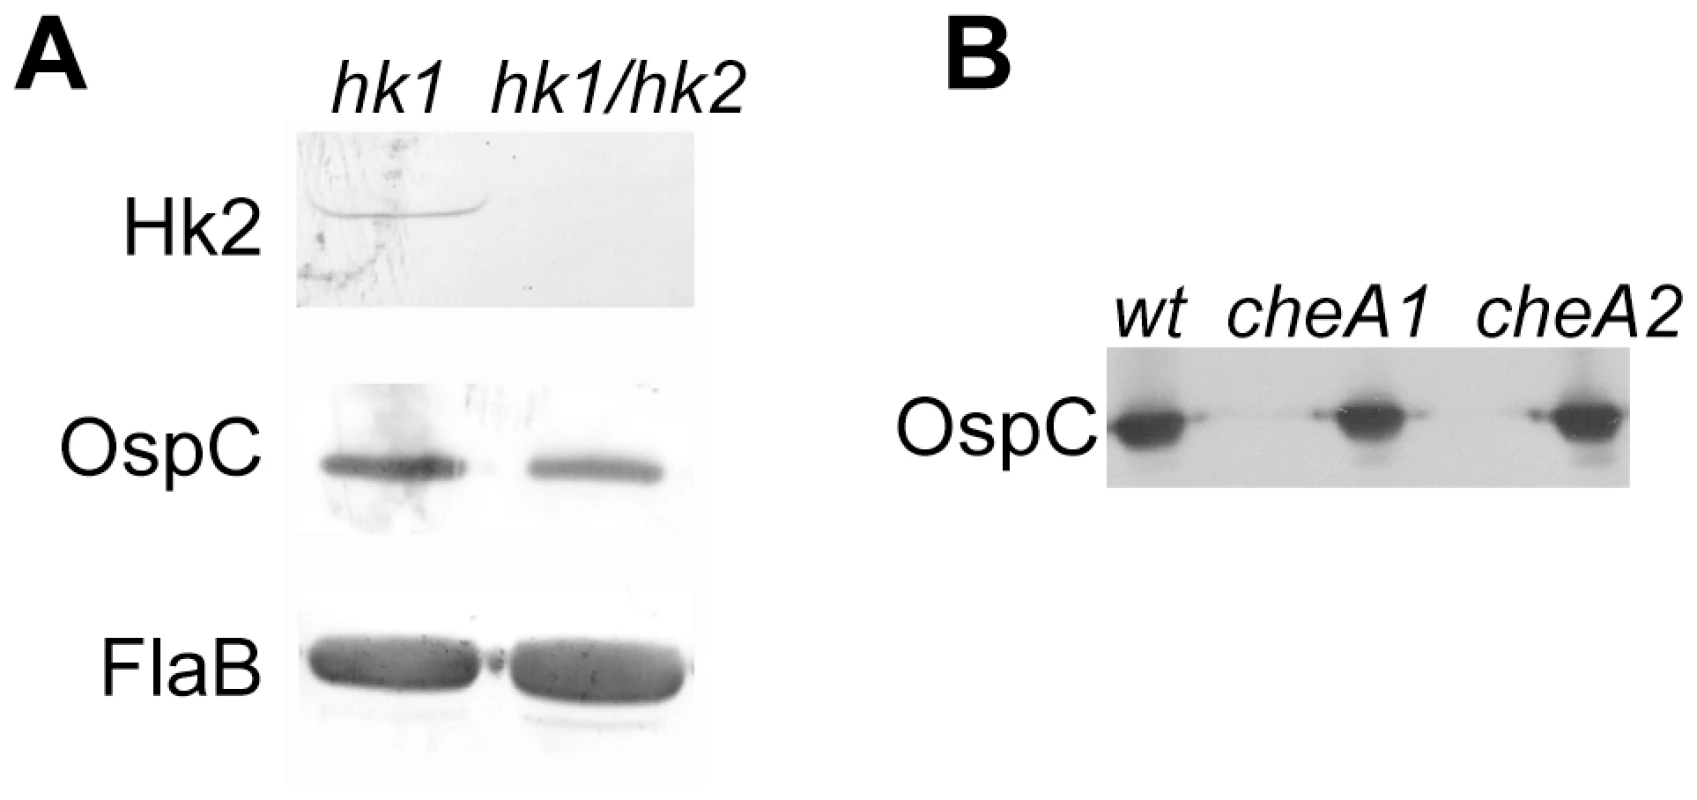 The <i>hk1 hk2</i> double mutant and the <i>cheA1</i> or <i>cheA2</i> mutant have normal level of Rrp2 activation.